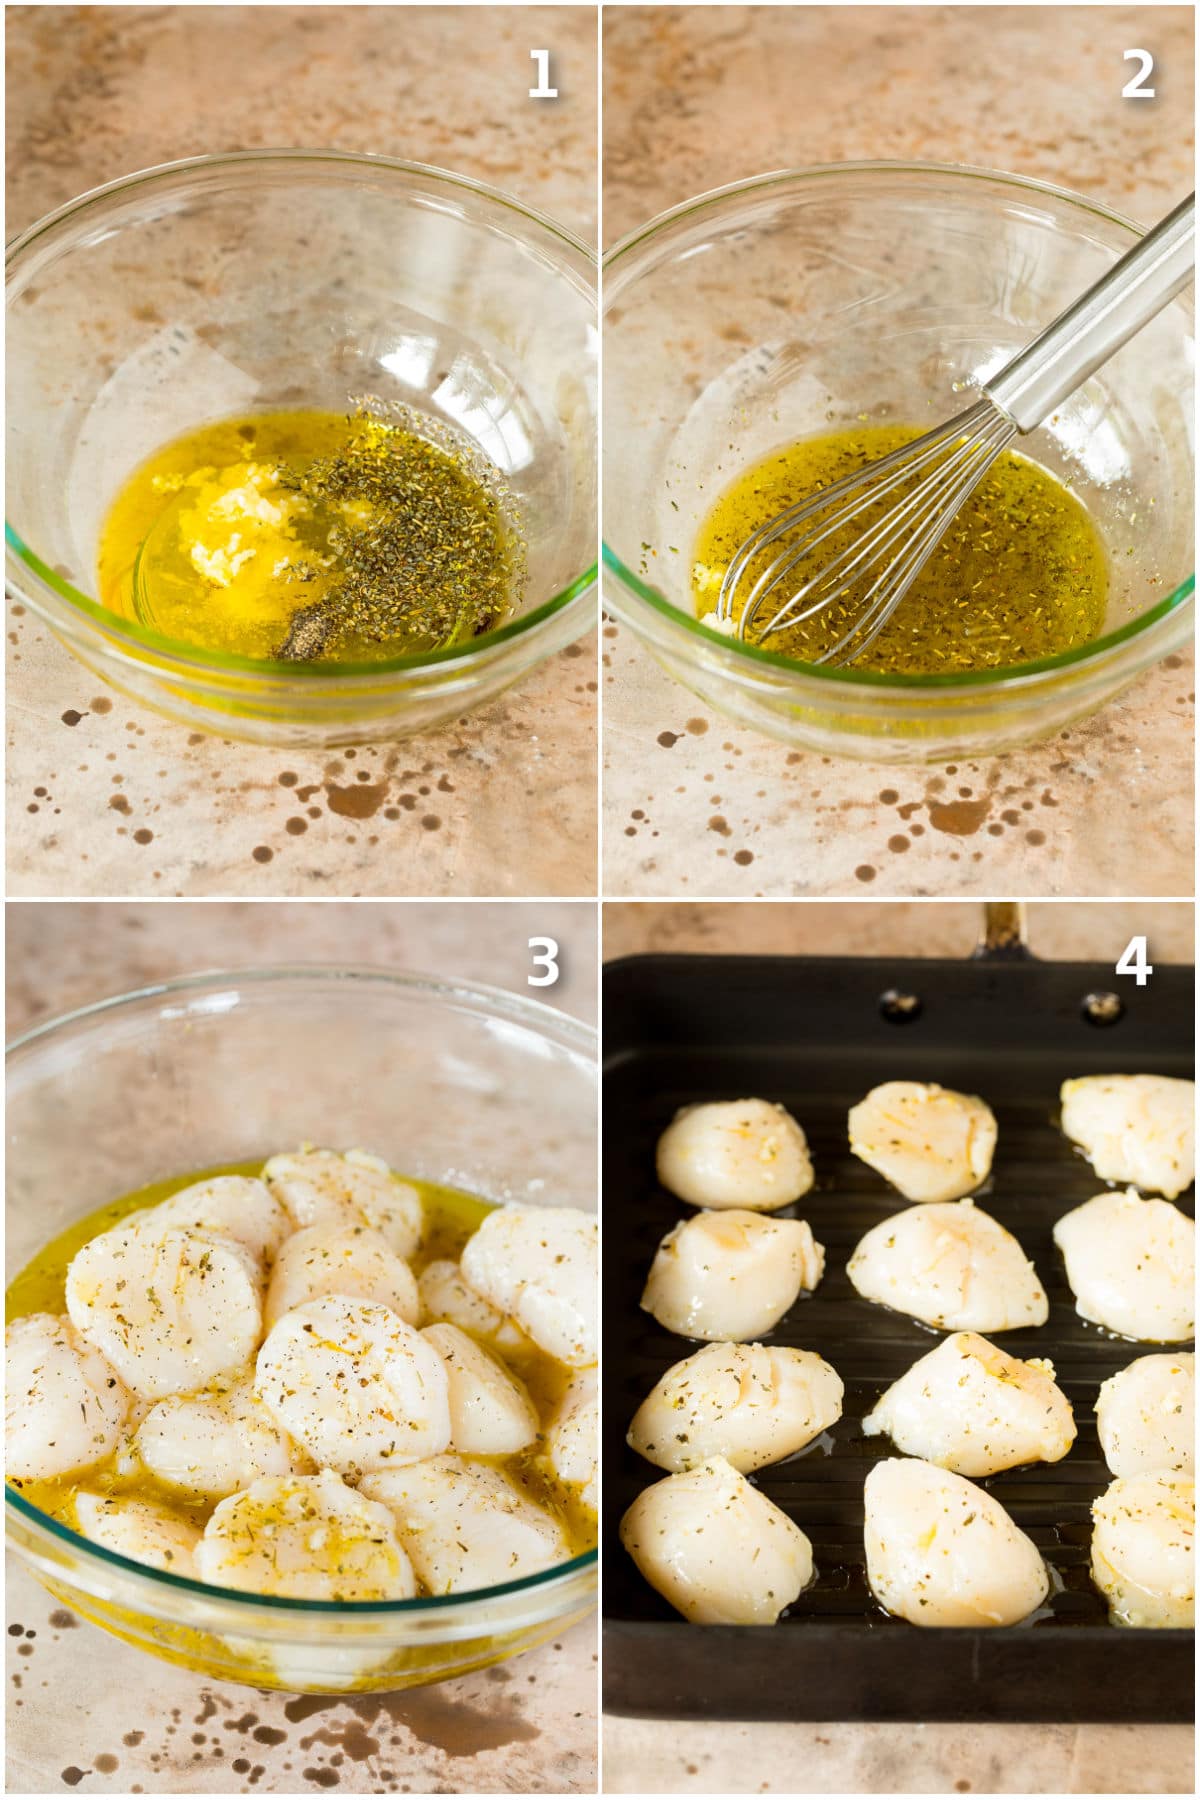 Step by step shots showing how to marinate and grill scallops.